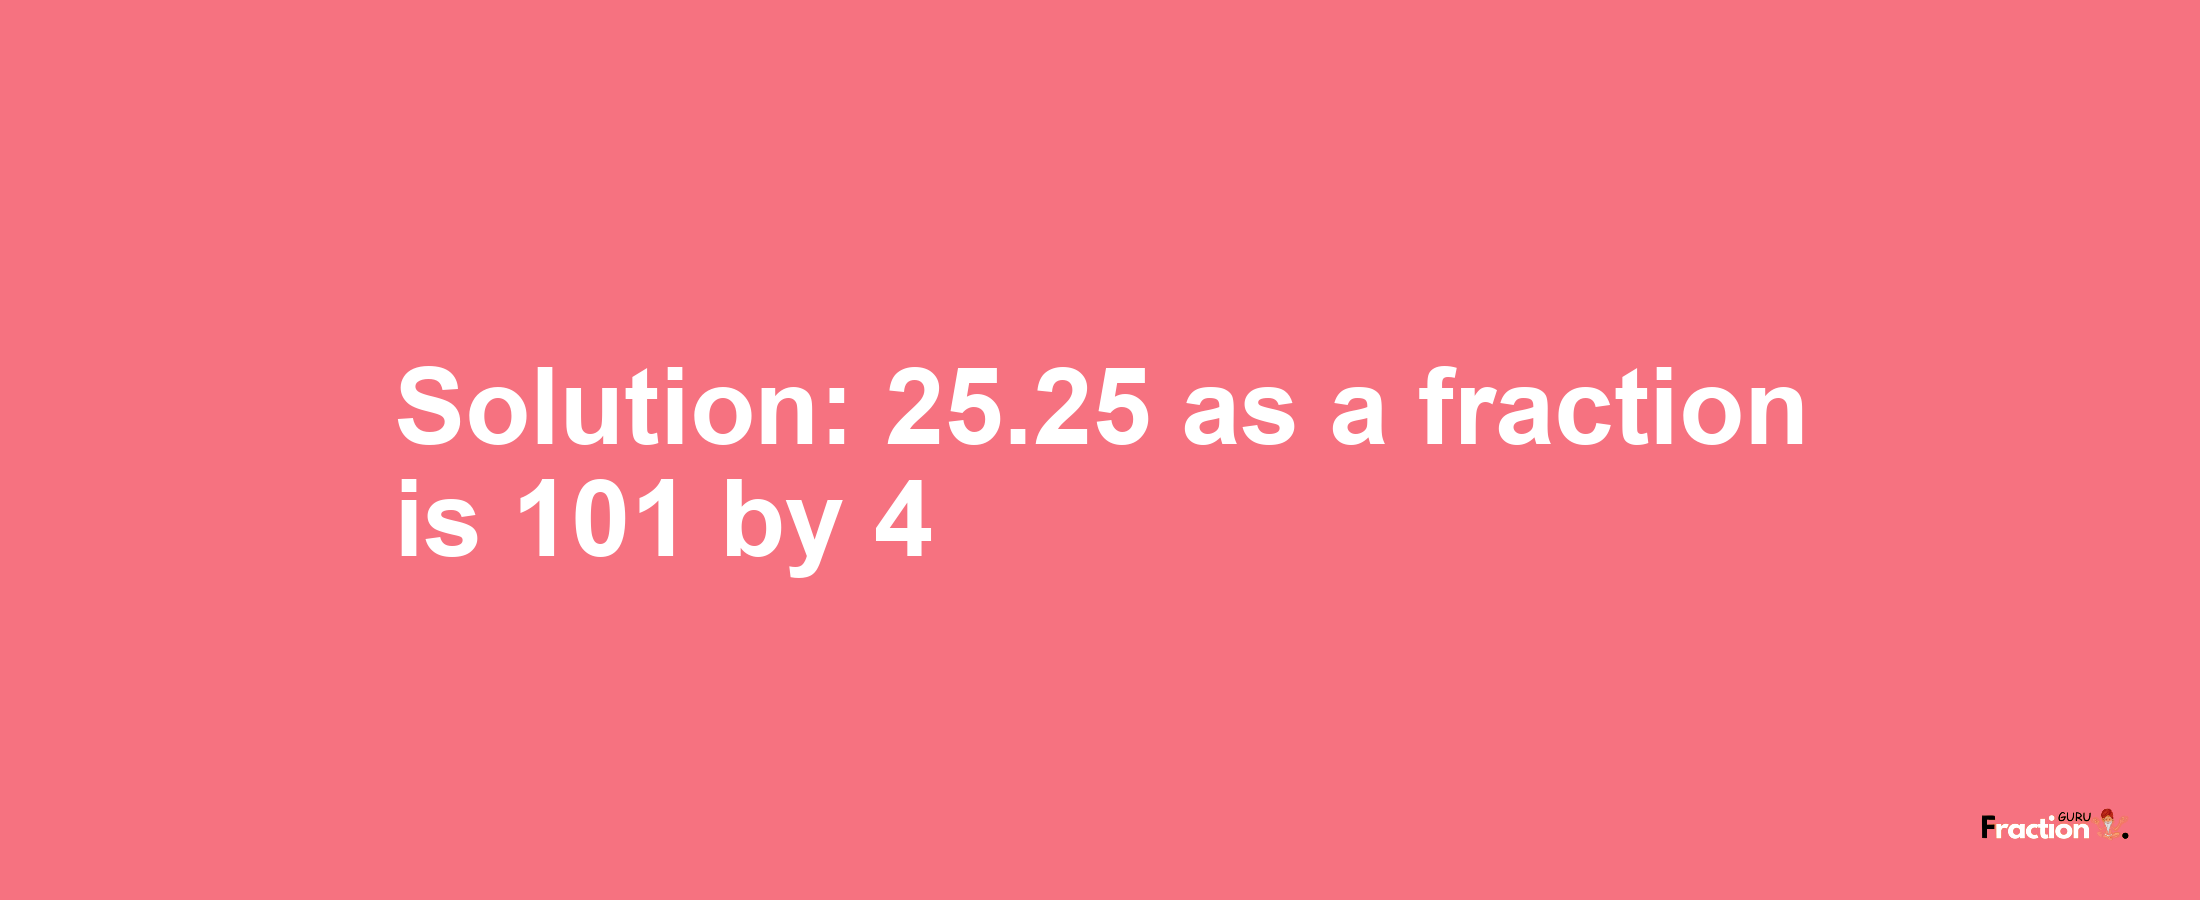 Solution:25.25 as a fraction is 101/4